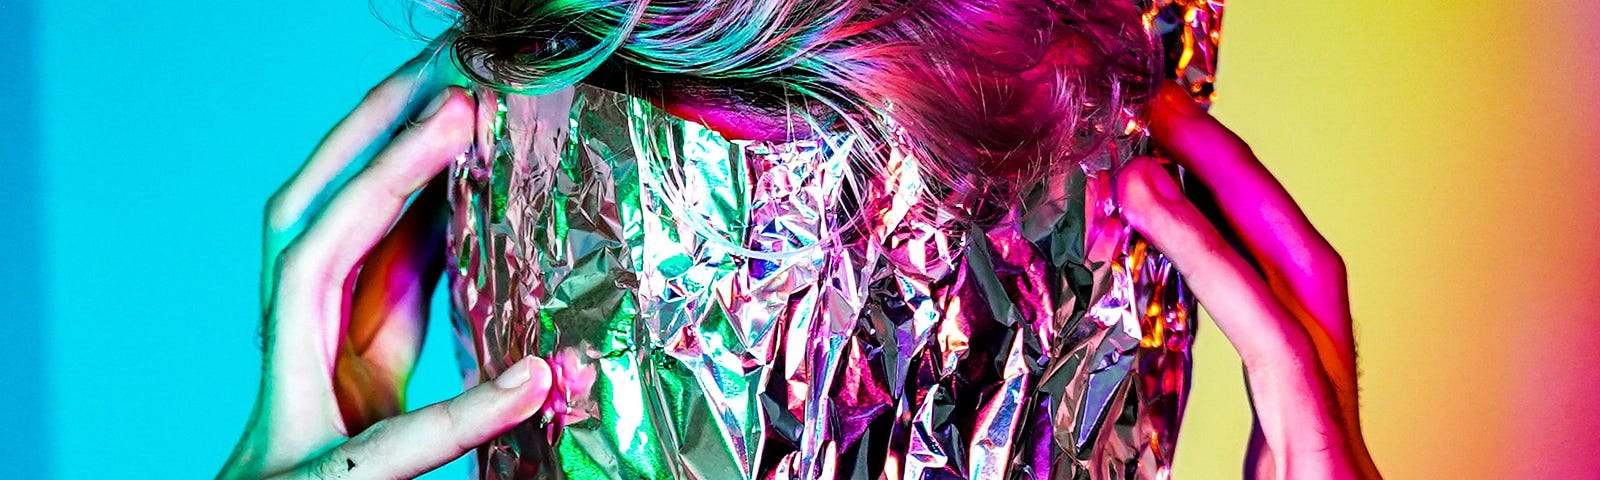 Neon background split evenly into two colors of blue and yellow, with a person squeezing their head, covered in aluminum foil with their finger tips.